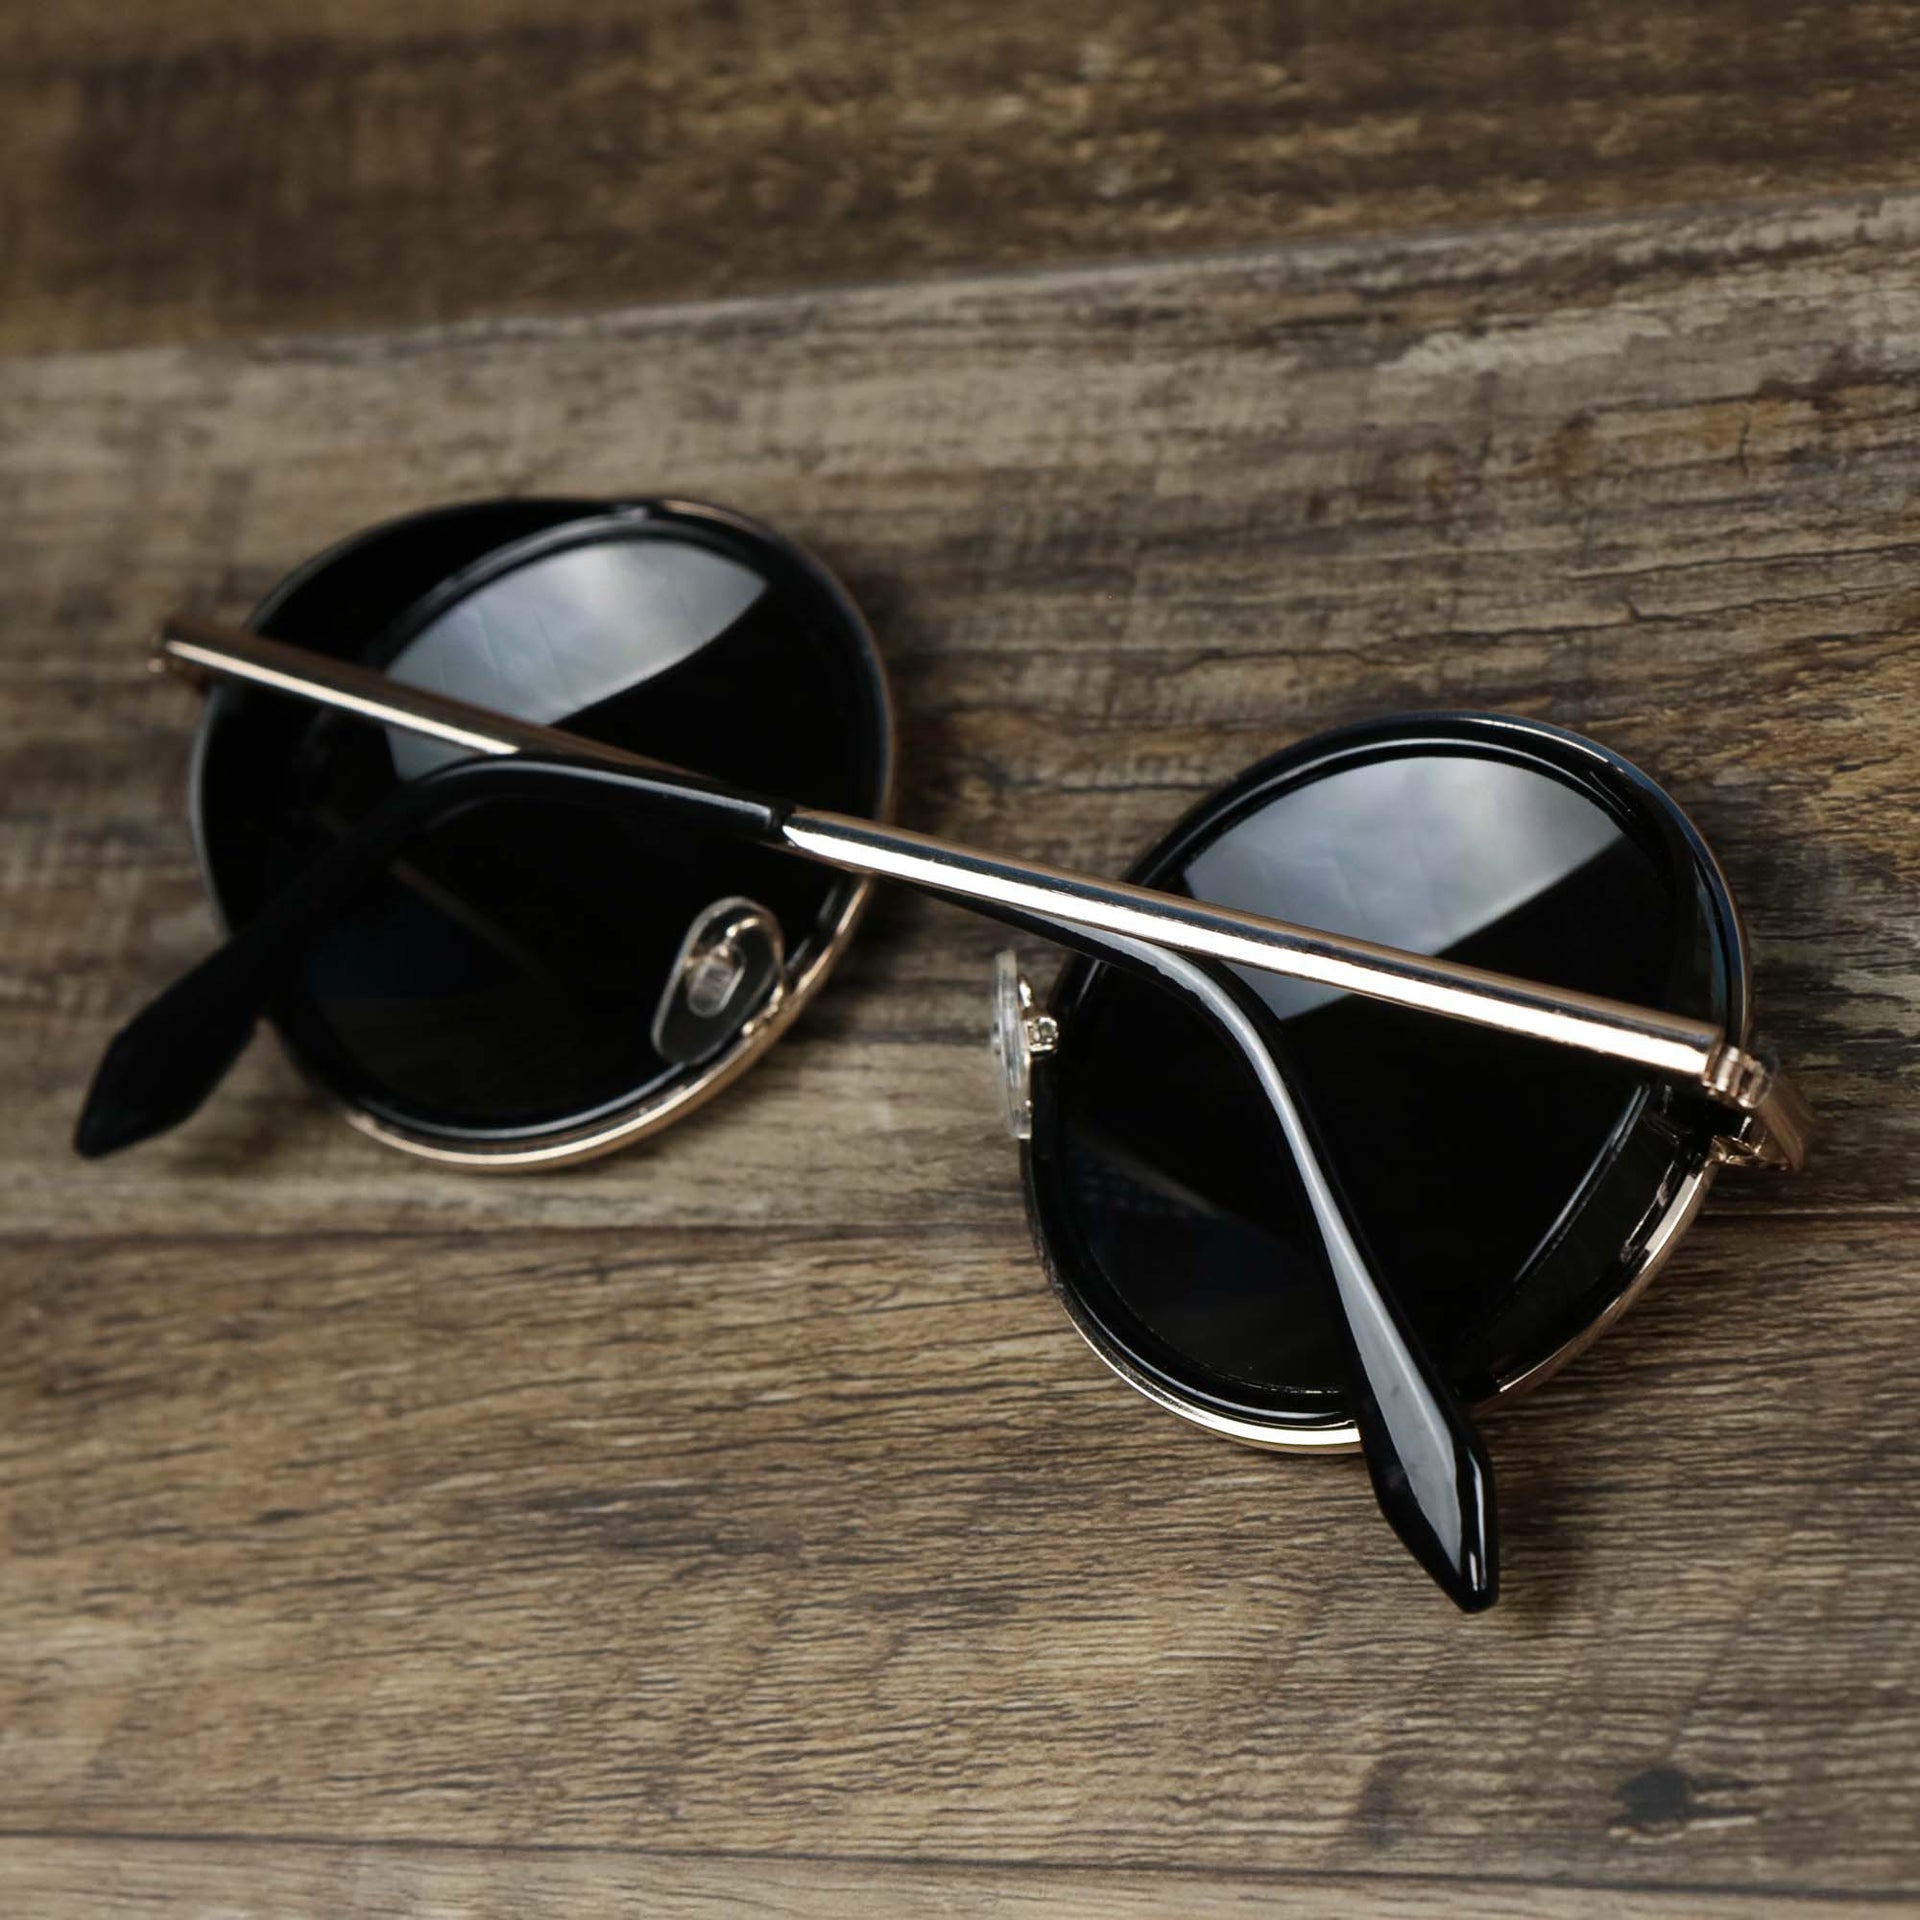 The Circle Frame Black Lens Sunglasses with Gold Frame folded up